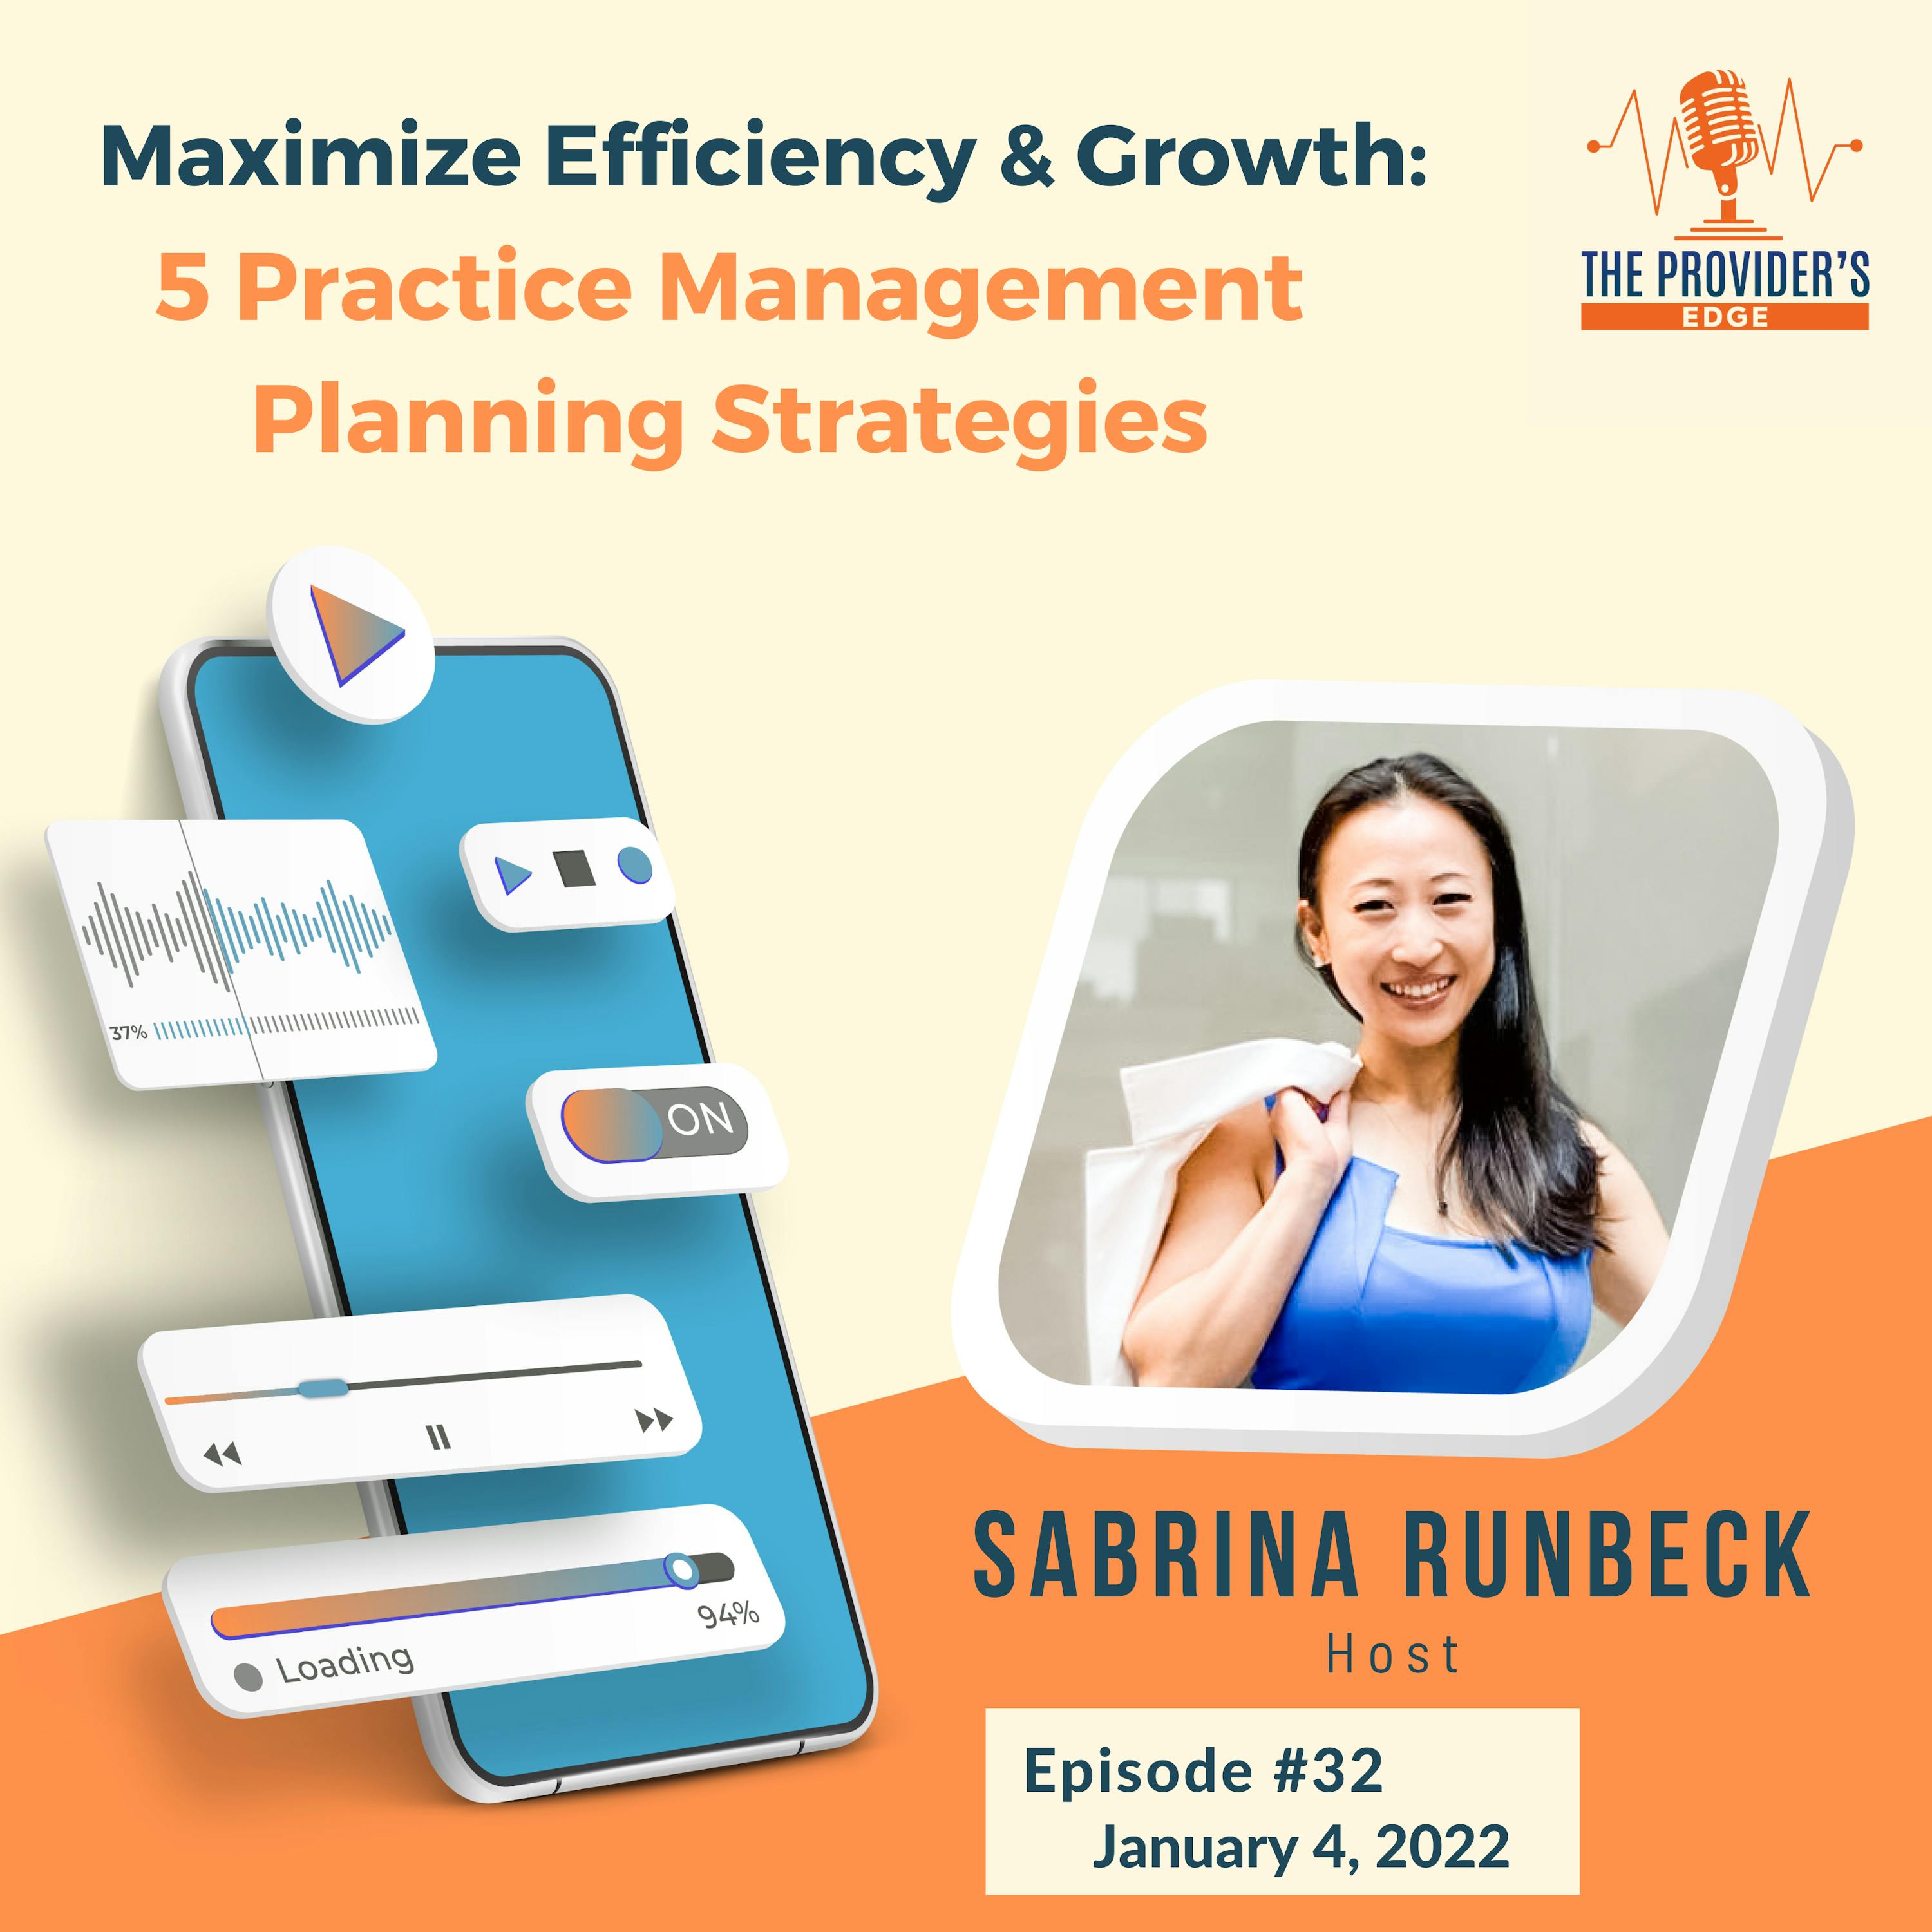 Maximize Efficiency & Growth: 5 Practice Management Planning Strategies